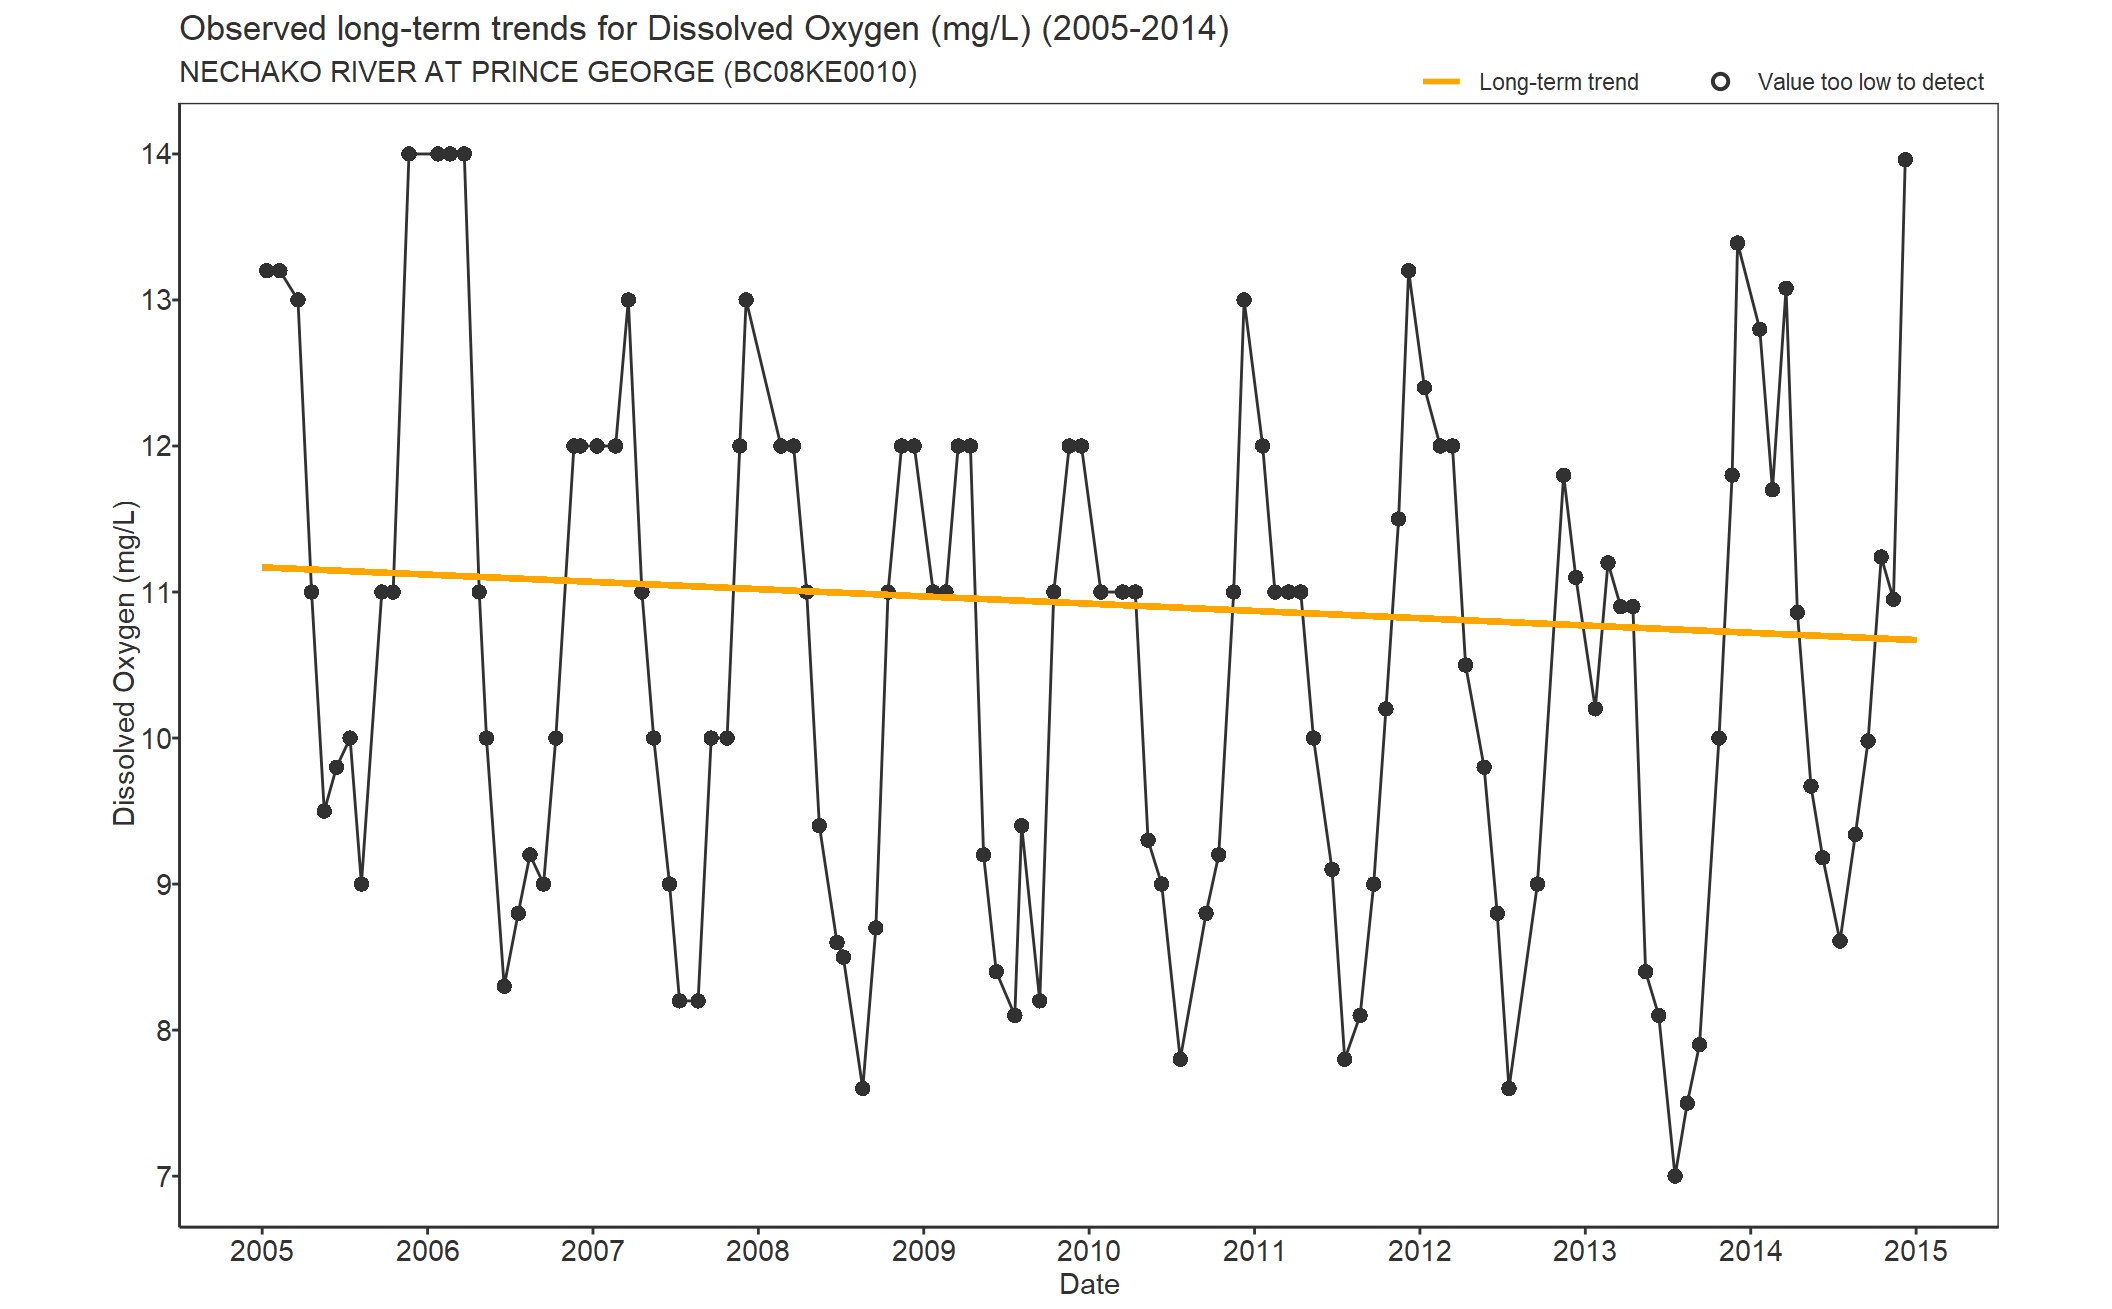 Observed long-term trends for Oxygen Dissolved (2005-2014)